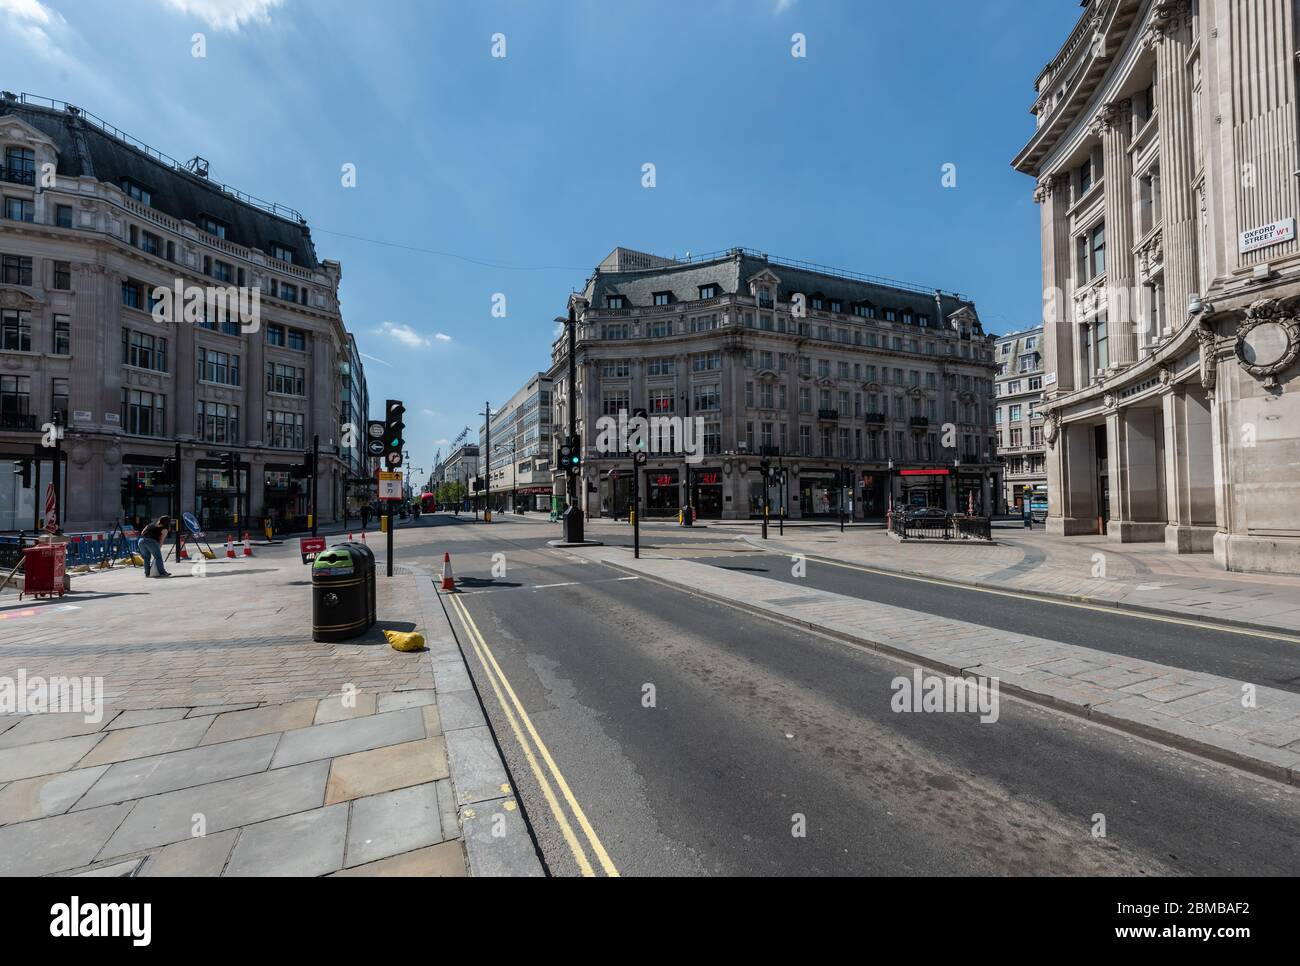 Oxford Circus, London - Deserted Due To Covid-19 Lockdown Stock Photo